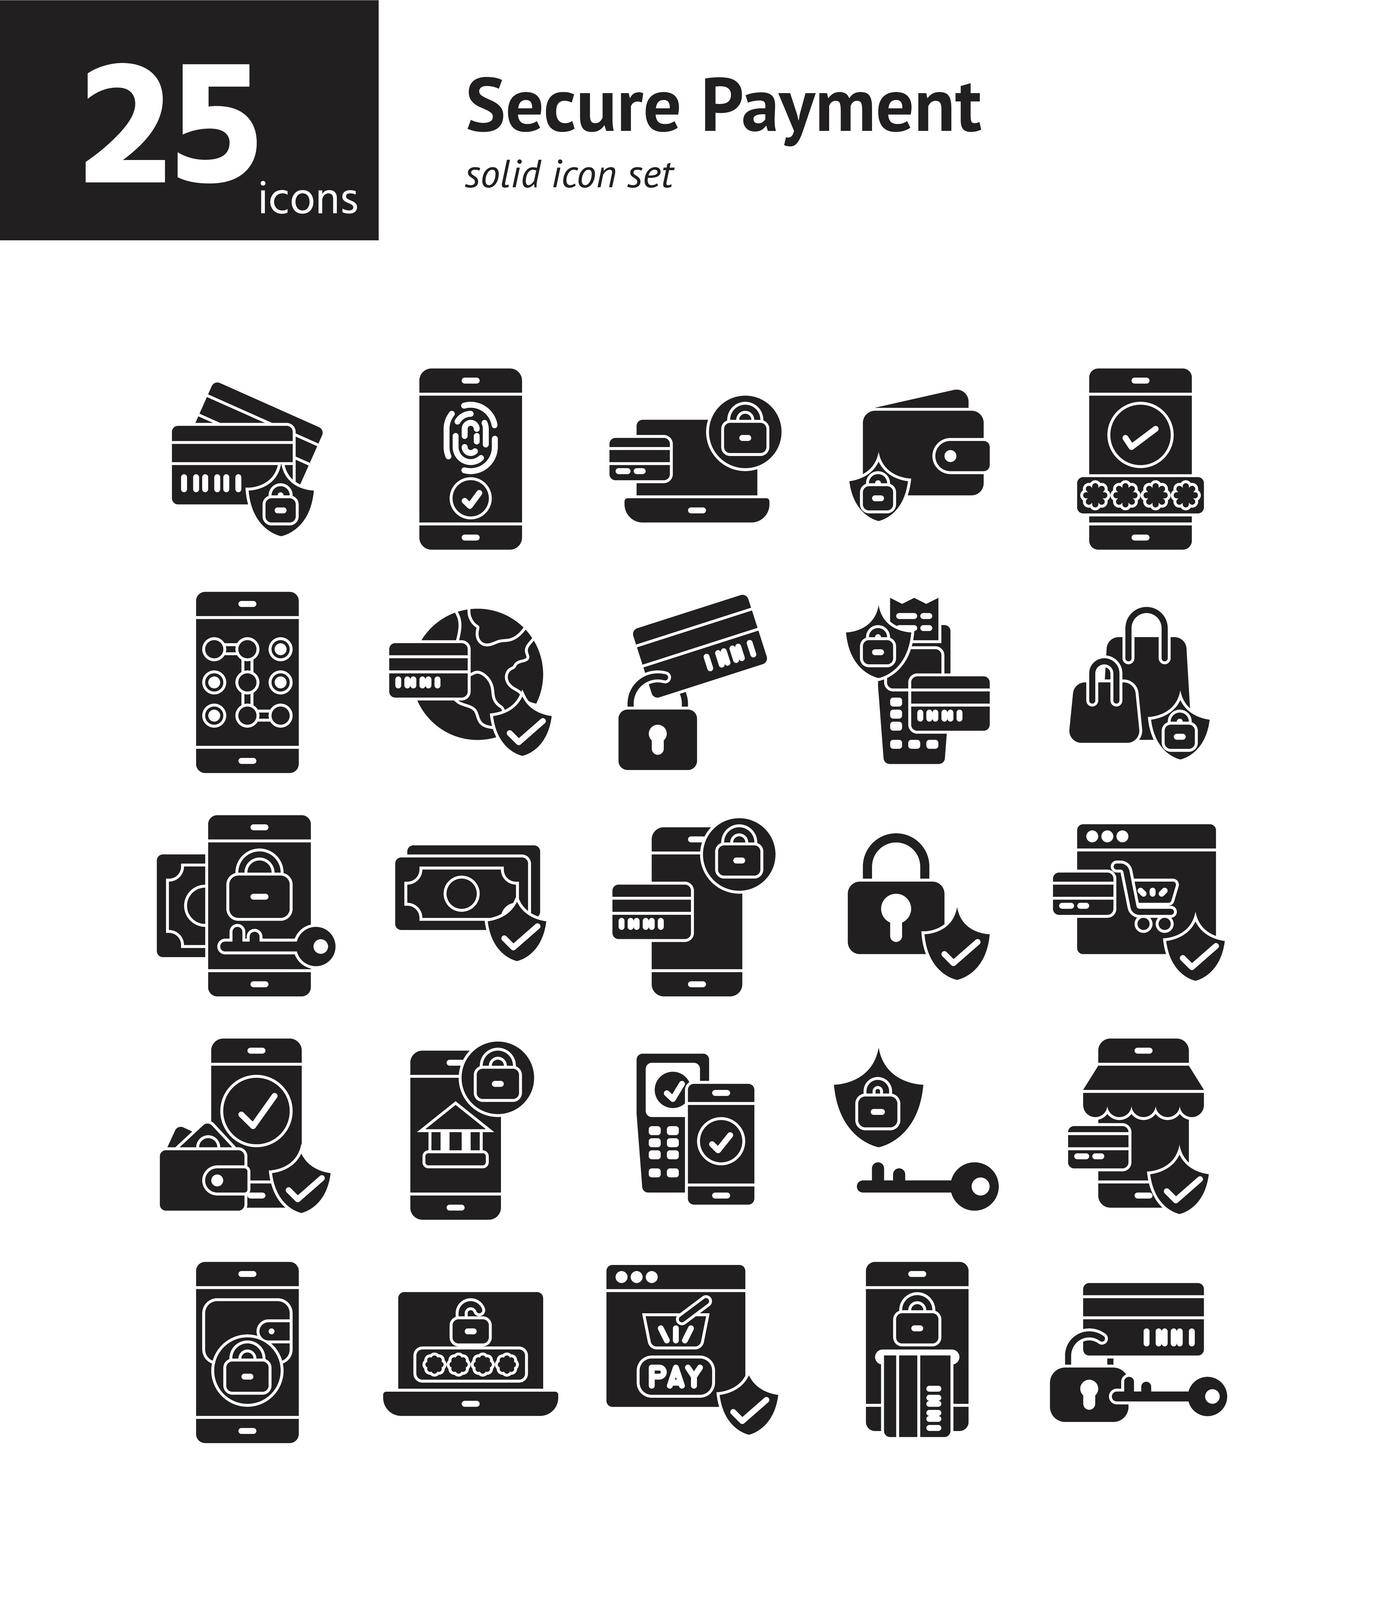 Secure Payment solid icon set. by doraclub